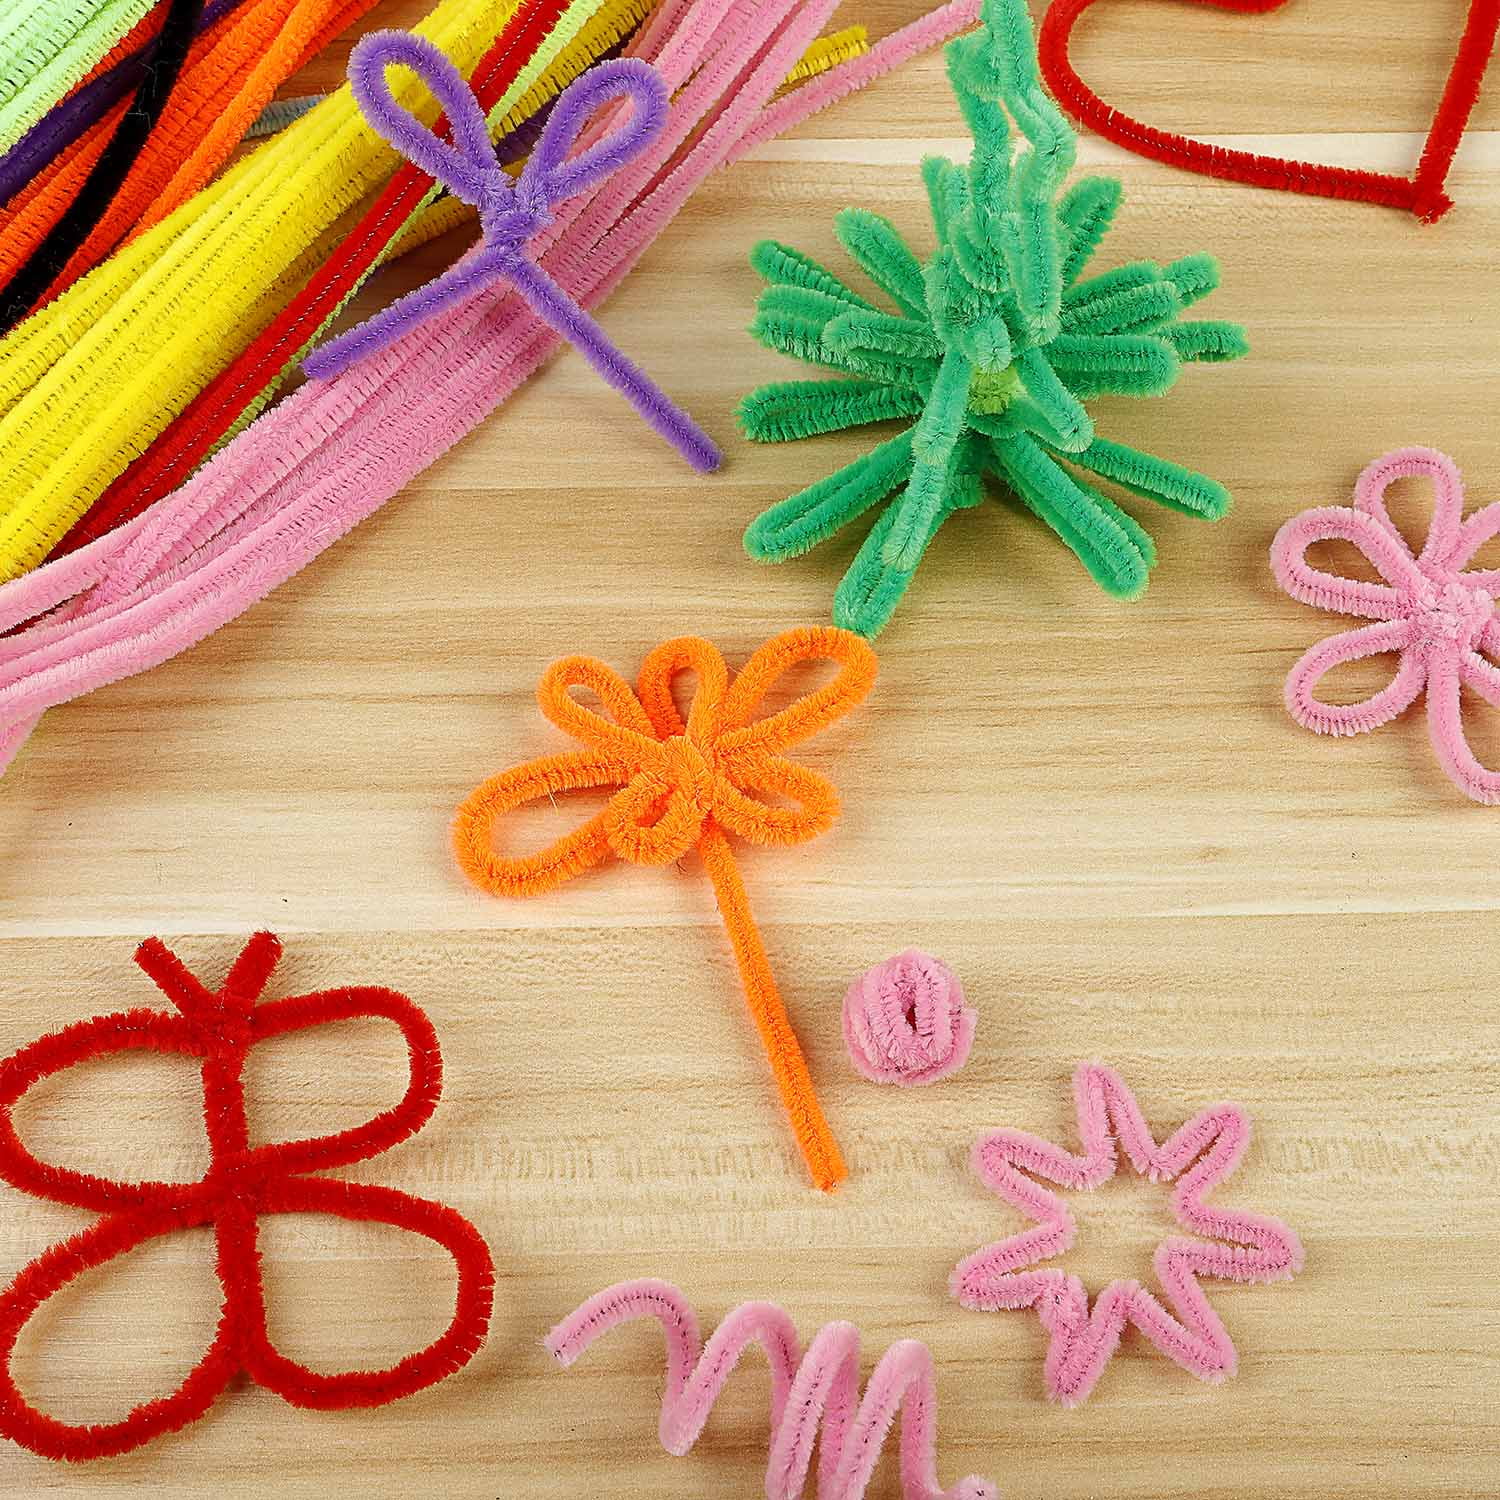 SAFIGLE 100 Pcs DIY Crafts Pipe Stem Pipe Favors Pipe Cleaners Bulk DIY Art  Pipe Cleaners Pastel Pipe Cleaners Plumbing The Gift DIY Toys Kid Gifts